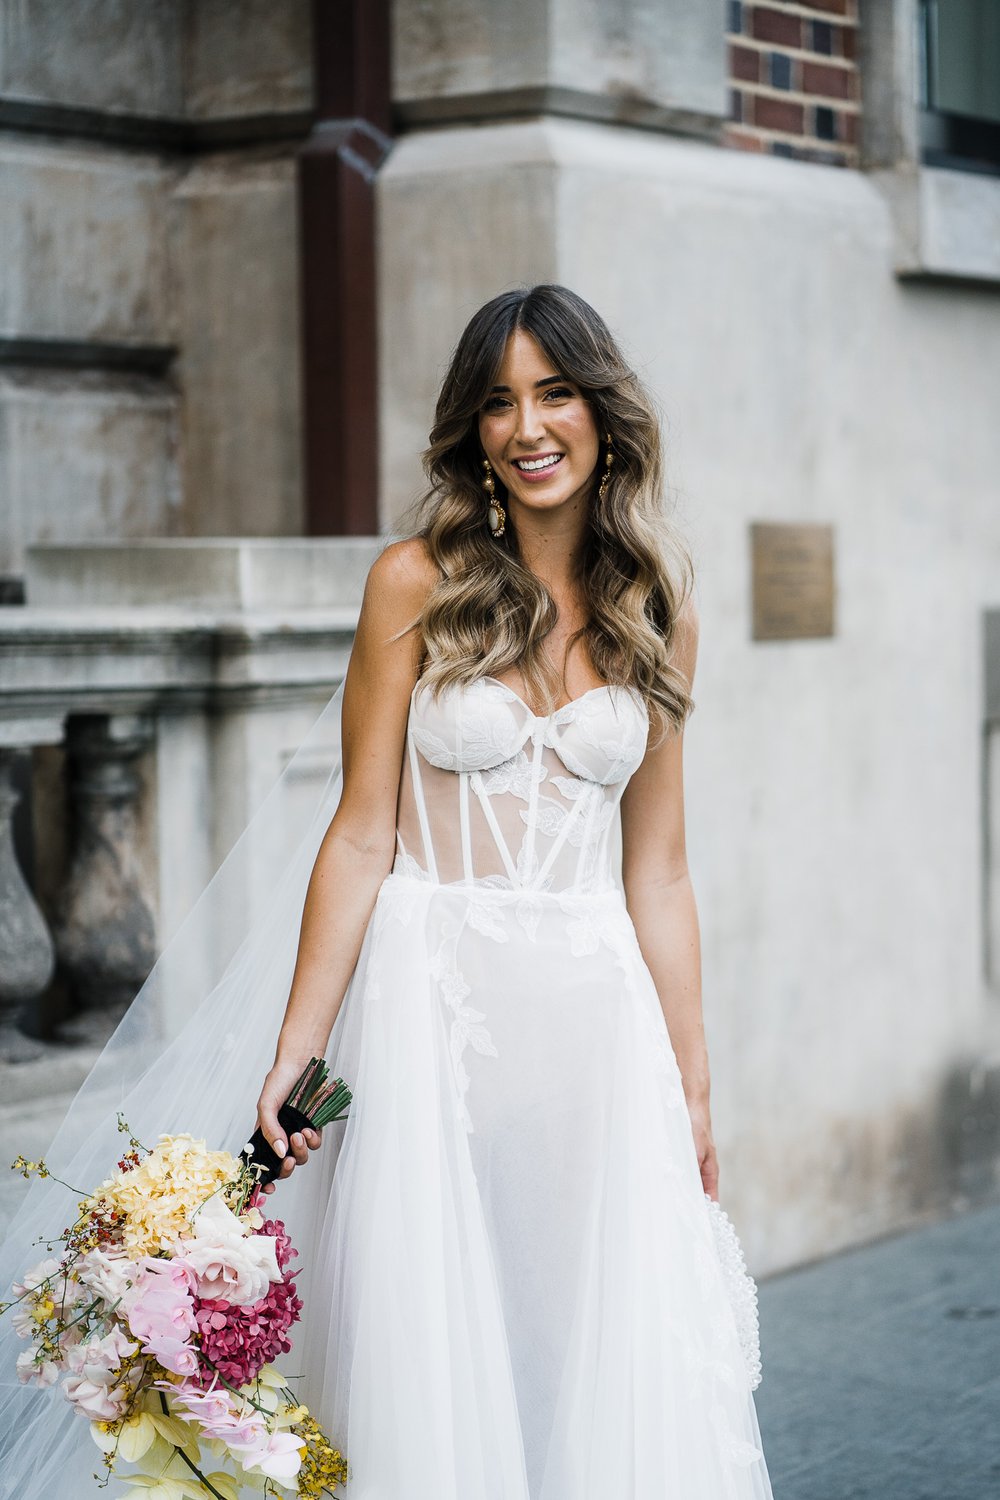  beautiful bride in her stylish wedding dress and holding her fresh flower bouquet 